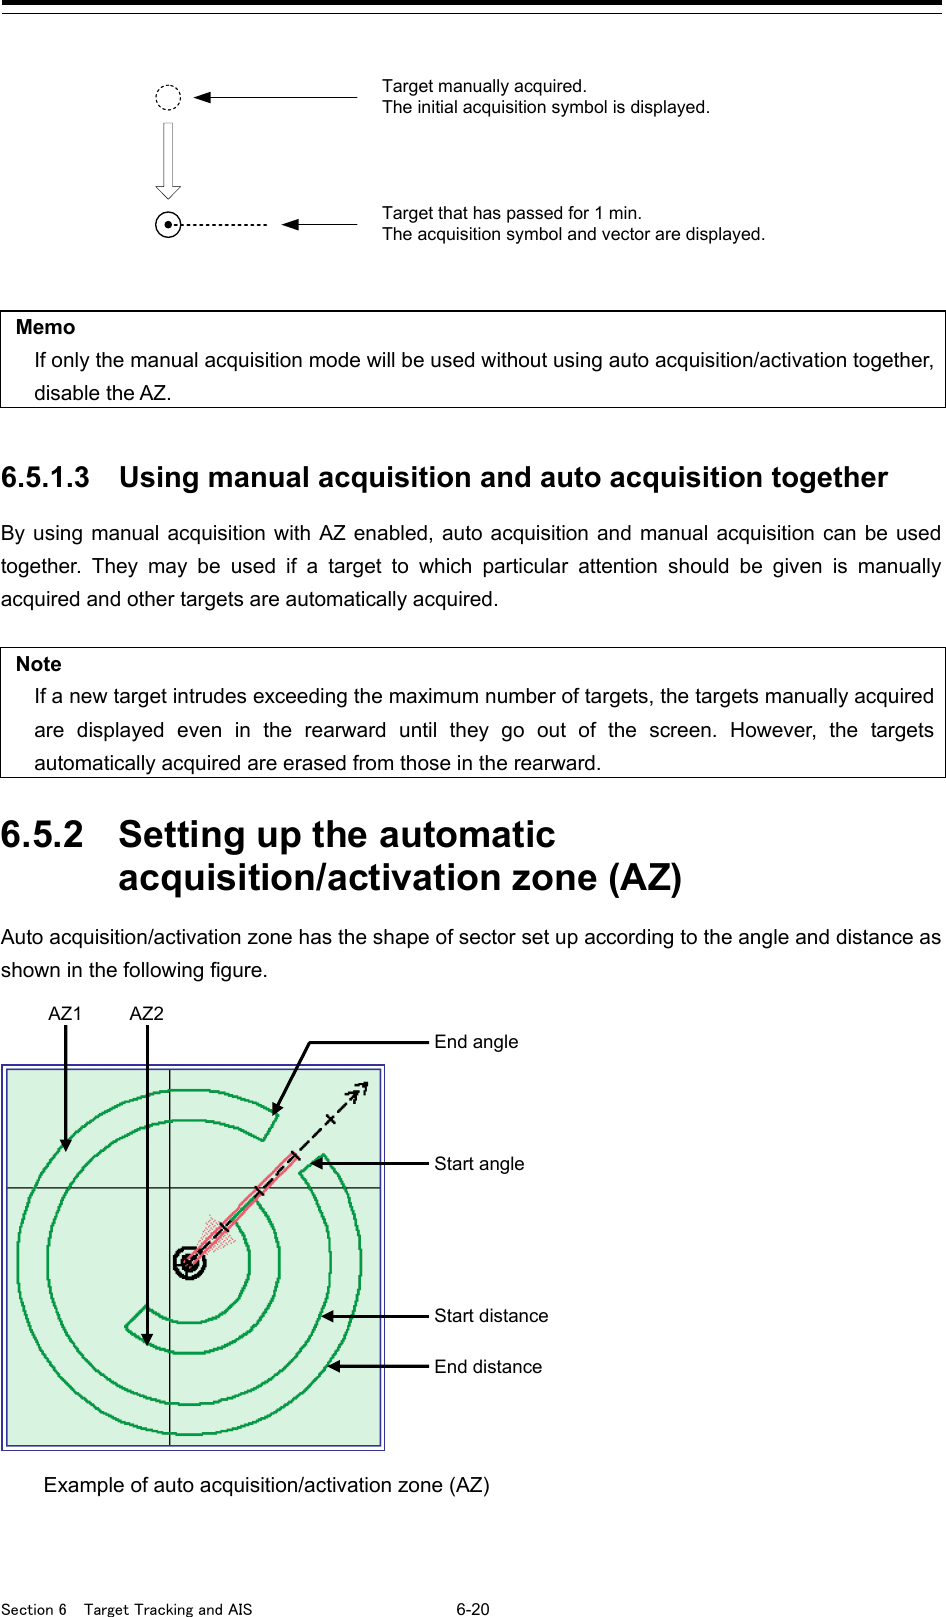  Section 6  Target Tracking and AIS 6-20    Memo If only the manual acquisition mode will be used without using auto acquisition/activation together, disable the AZ.   6.5.1.3 Using manual acquisition and auto acquisition together By using manual acquisition with AZ enabled, auto acquisition and manual acquisition can be used together. They may be used if a target to which particular attention should be given is manually acquired and other targets are automatically acquired.  Note If a new target intrudes exceeding the maximum number of targets, the targets manually acquired are displayed even in the rearward until they go out of the screen. However, the targets automatically acquired are erased from those in the rearward.  6.5.2 Setting up the automatic acquisition/activation zone (AZ) Auto acquisition/activation zone has the shape of sector set up according to the angle and distance as shown in the following figure.      Start angle AZ1 AZ2 Start distance End distance End angle Example of auto acquisition/activation zone (AZ)  Target manually acquired.The initial acquisition symbol is displayed.Target that has passed for 1 min.The acquisition symbol and vector are displayed.